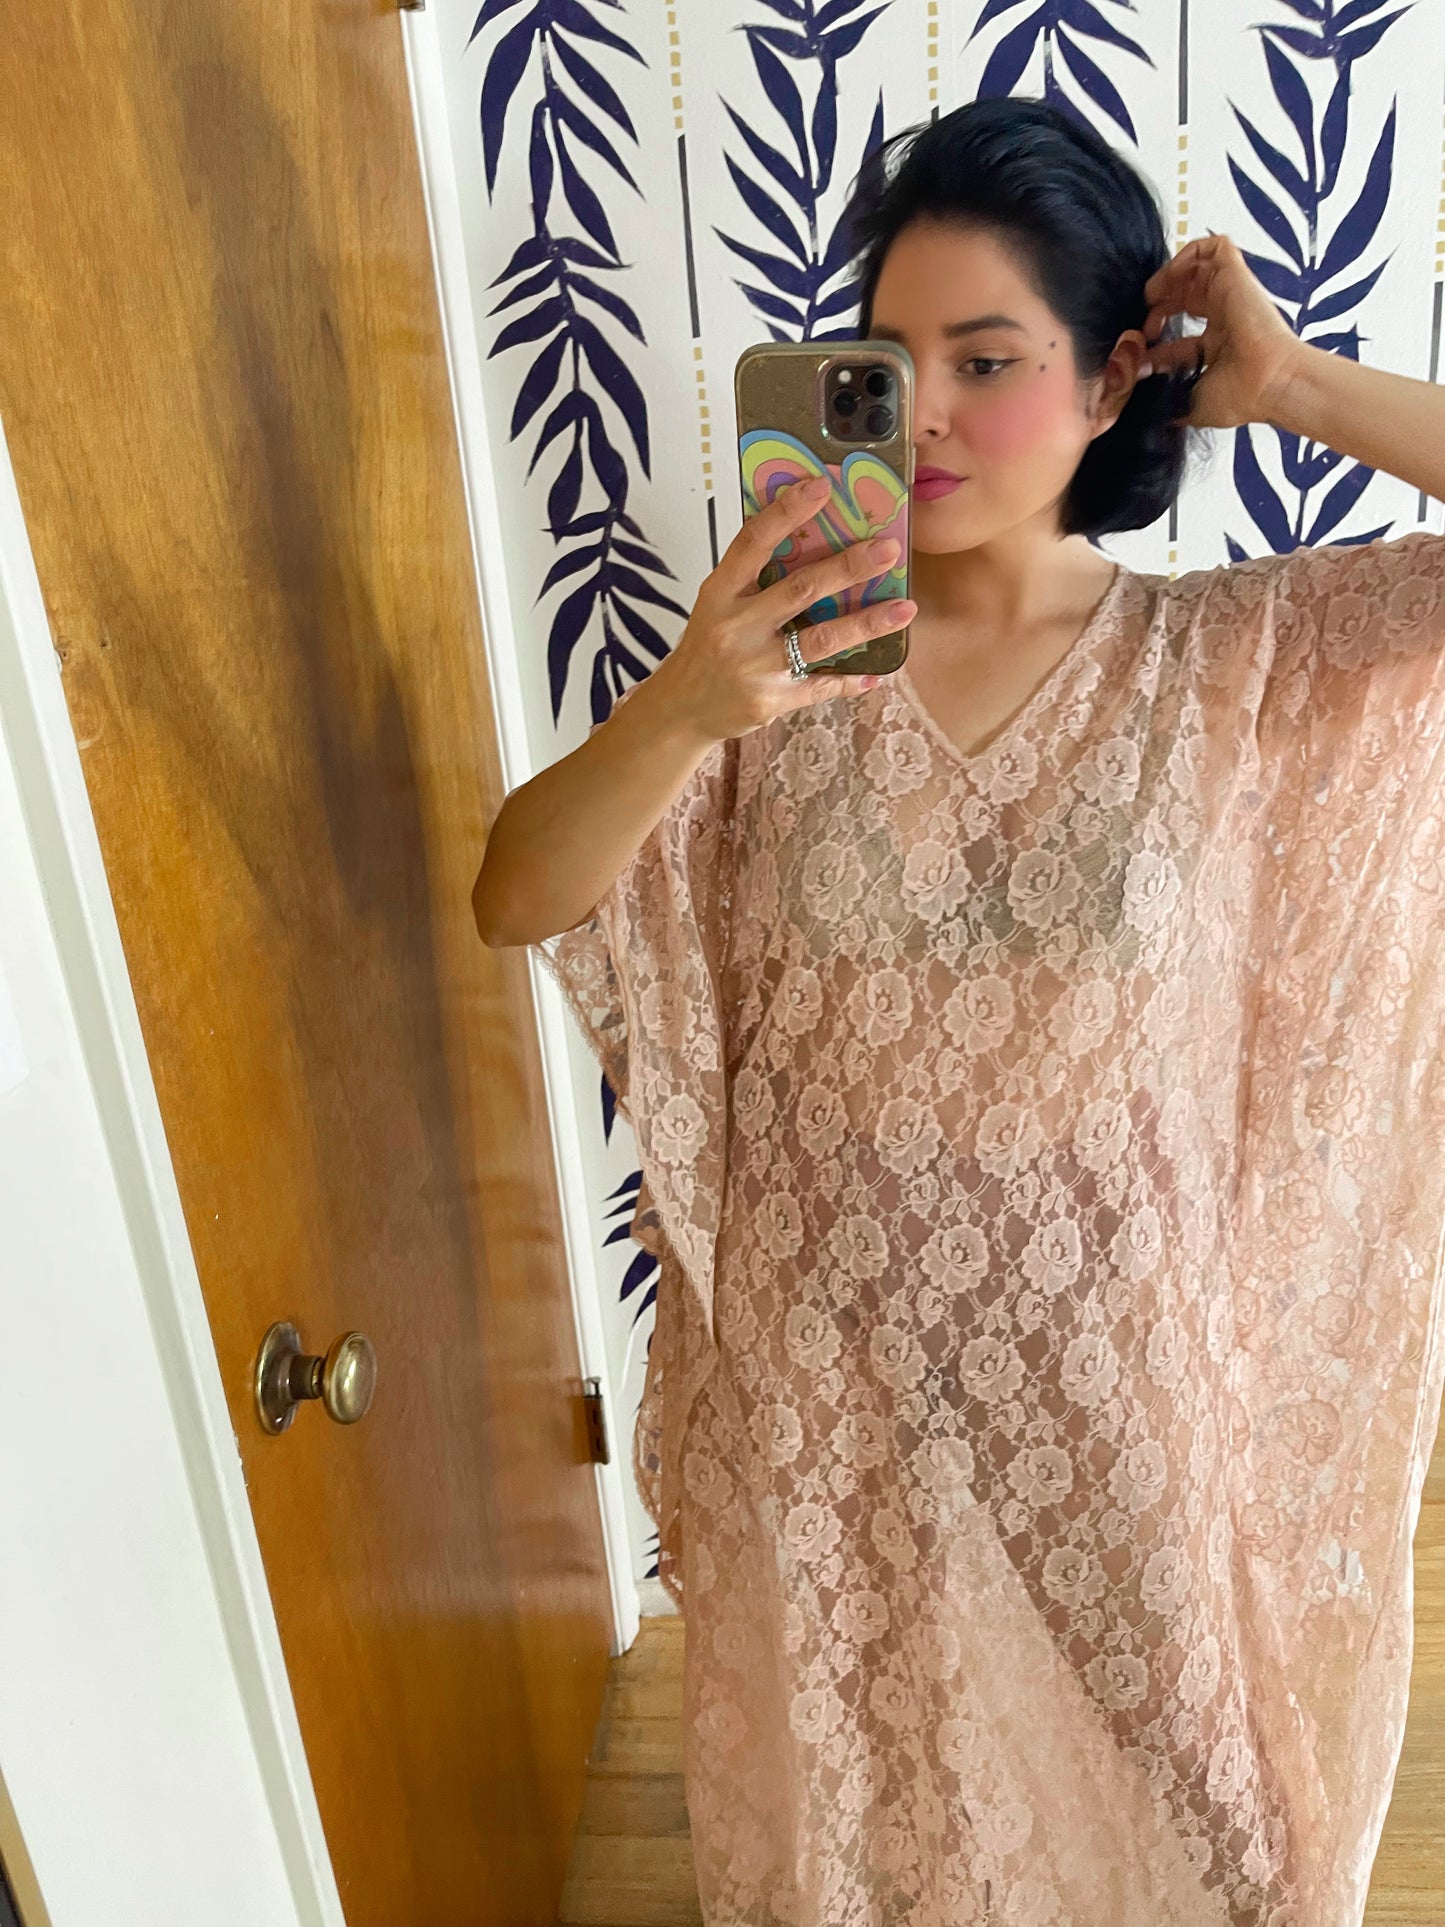 Vintage 60s / 70s Rose Pink Lace Sheer Caftan Matching Duster w/ Bell Sleeves Fits Most Sizes